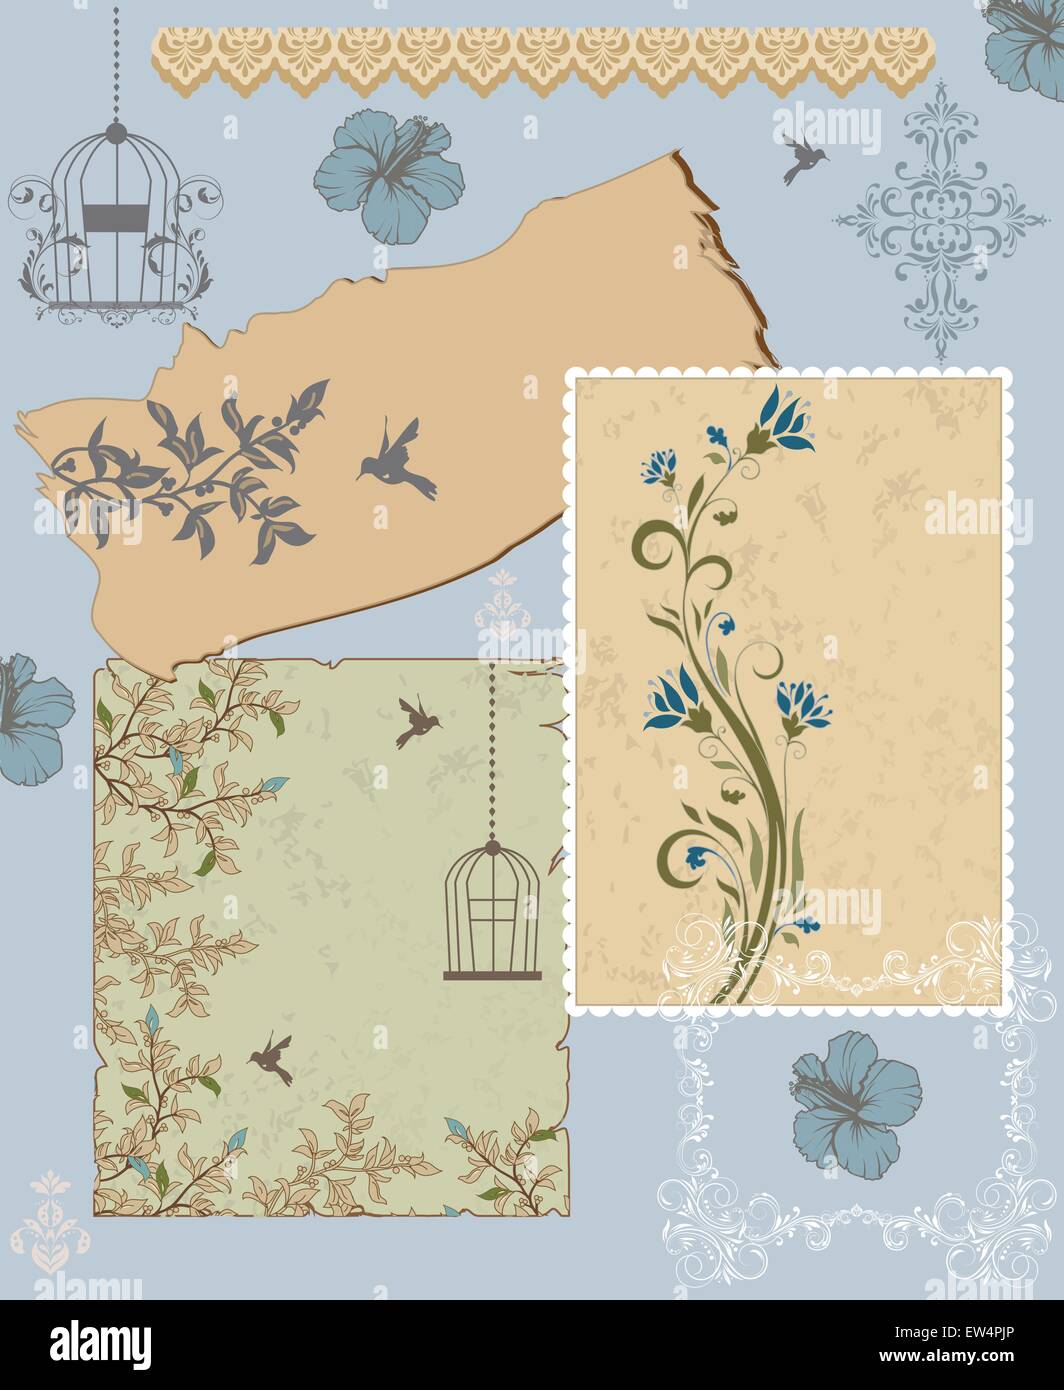 Vintage invitation card with ornate elegant retro abstract floral design, bluish gray and light brown flowers and leaves on grayish green beige and bluish gray background with frame borders birds and text label. Vector illustration. Stock Vector